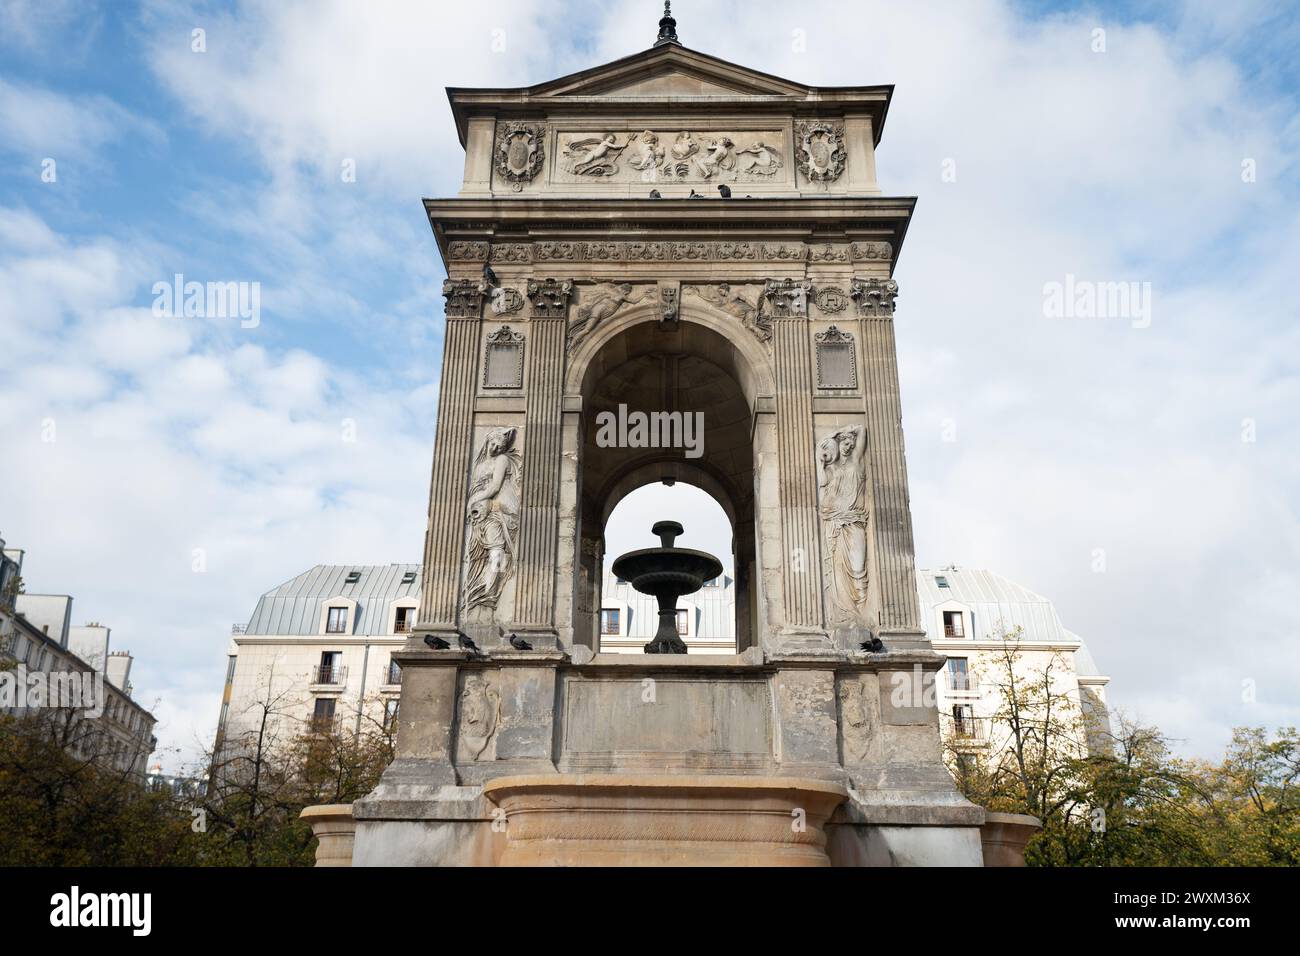 Fountain of innocents square in Paris, France Stock Photo